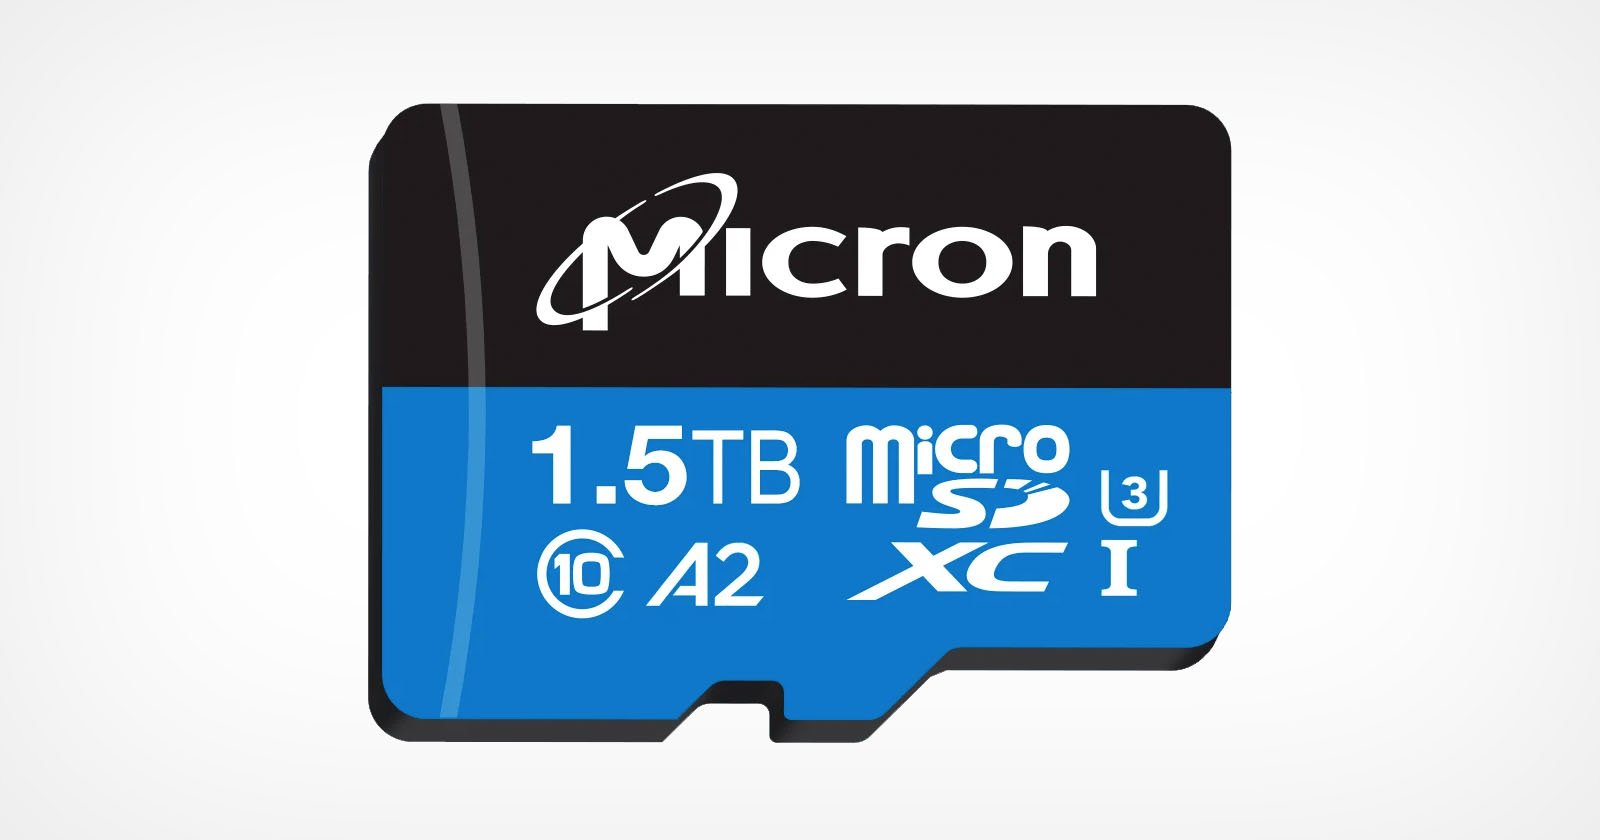 Micron's Record-Setting 1.5TB microSD Card Stores 4 Months of